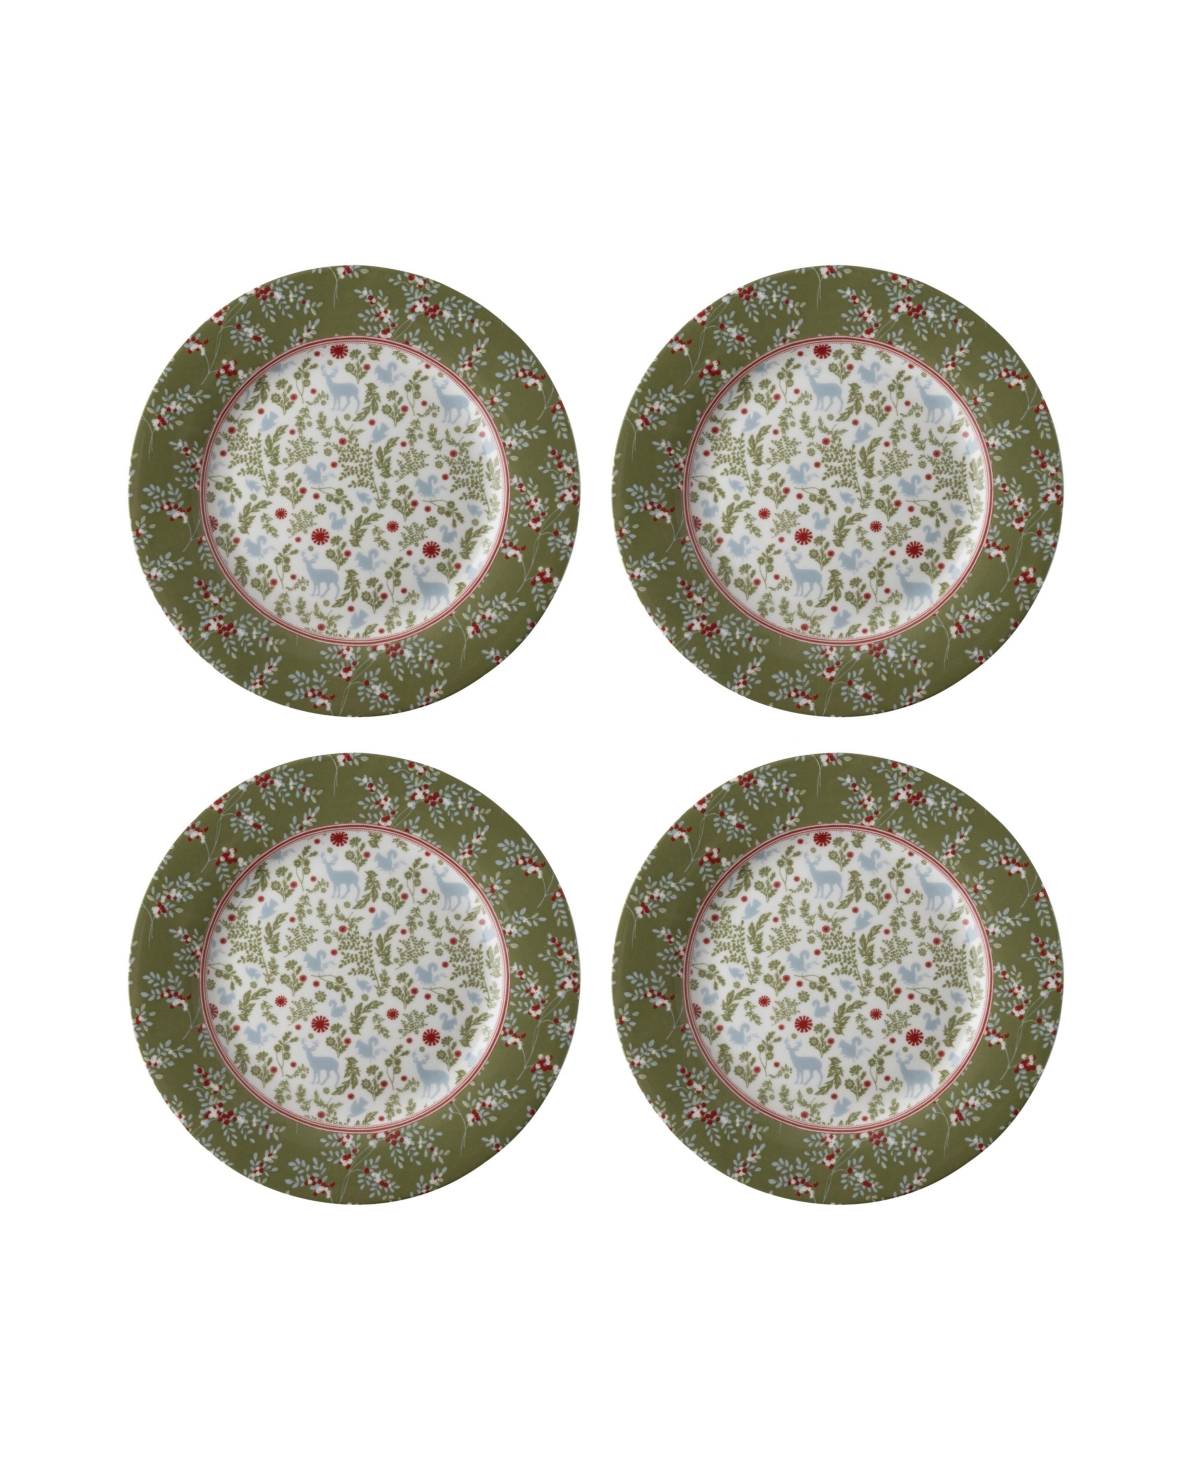 Laura Ashley Plates Stockbridge Collectables Gift Set, 4 Piece In Green